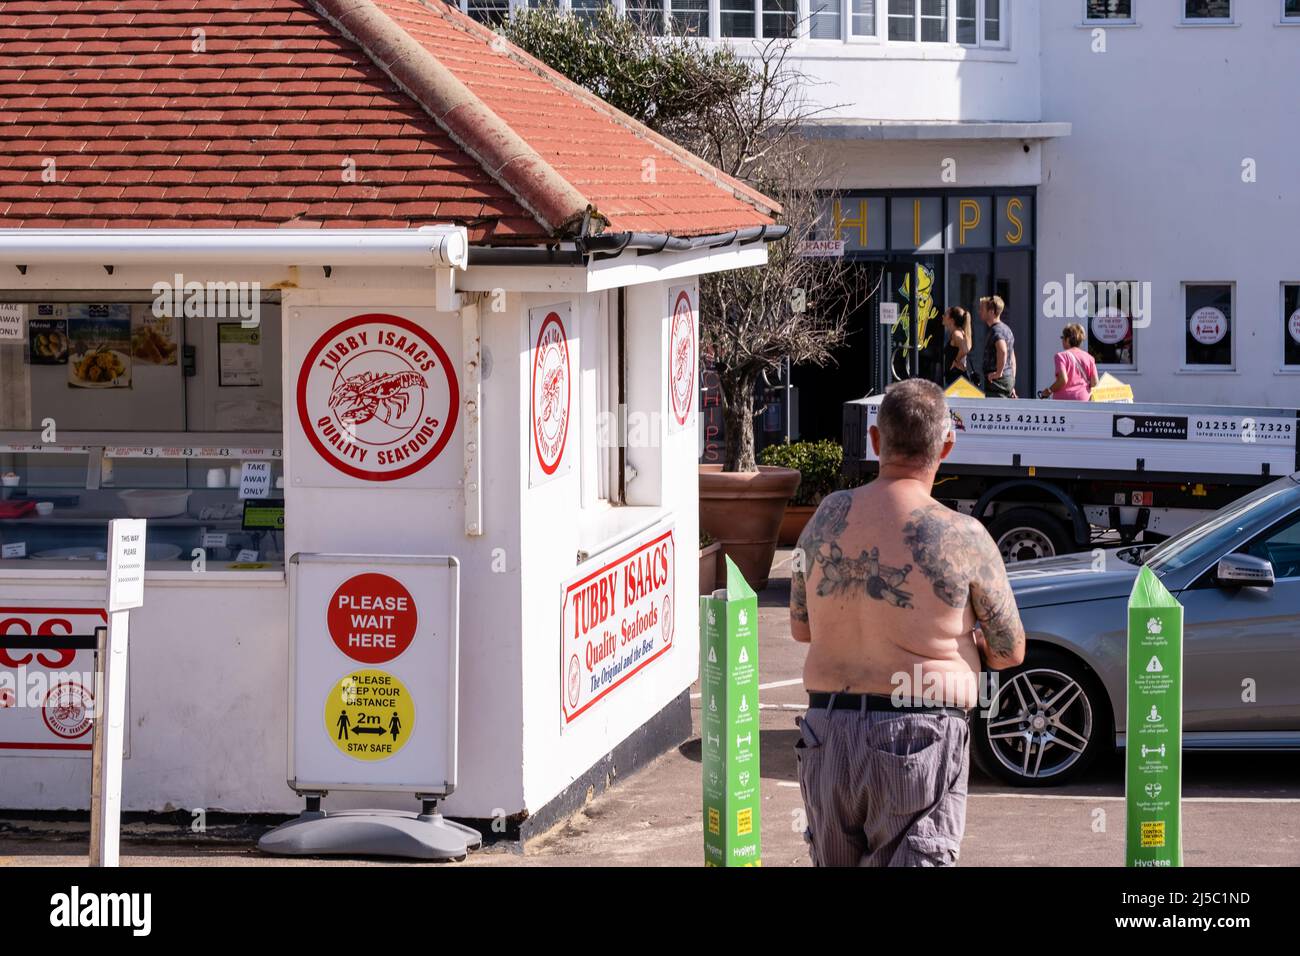 Man with tattoos outside Tubby Isaacs seafood stall in Clacton-on-Sea in Essex. Stock Photo